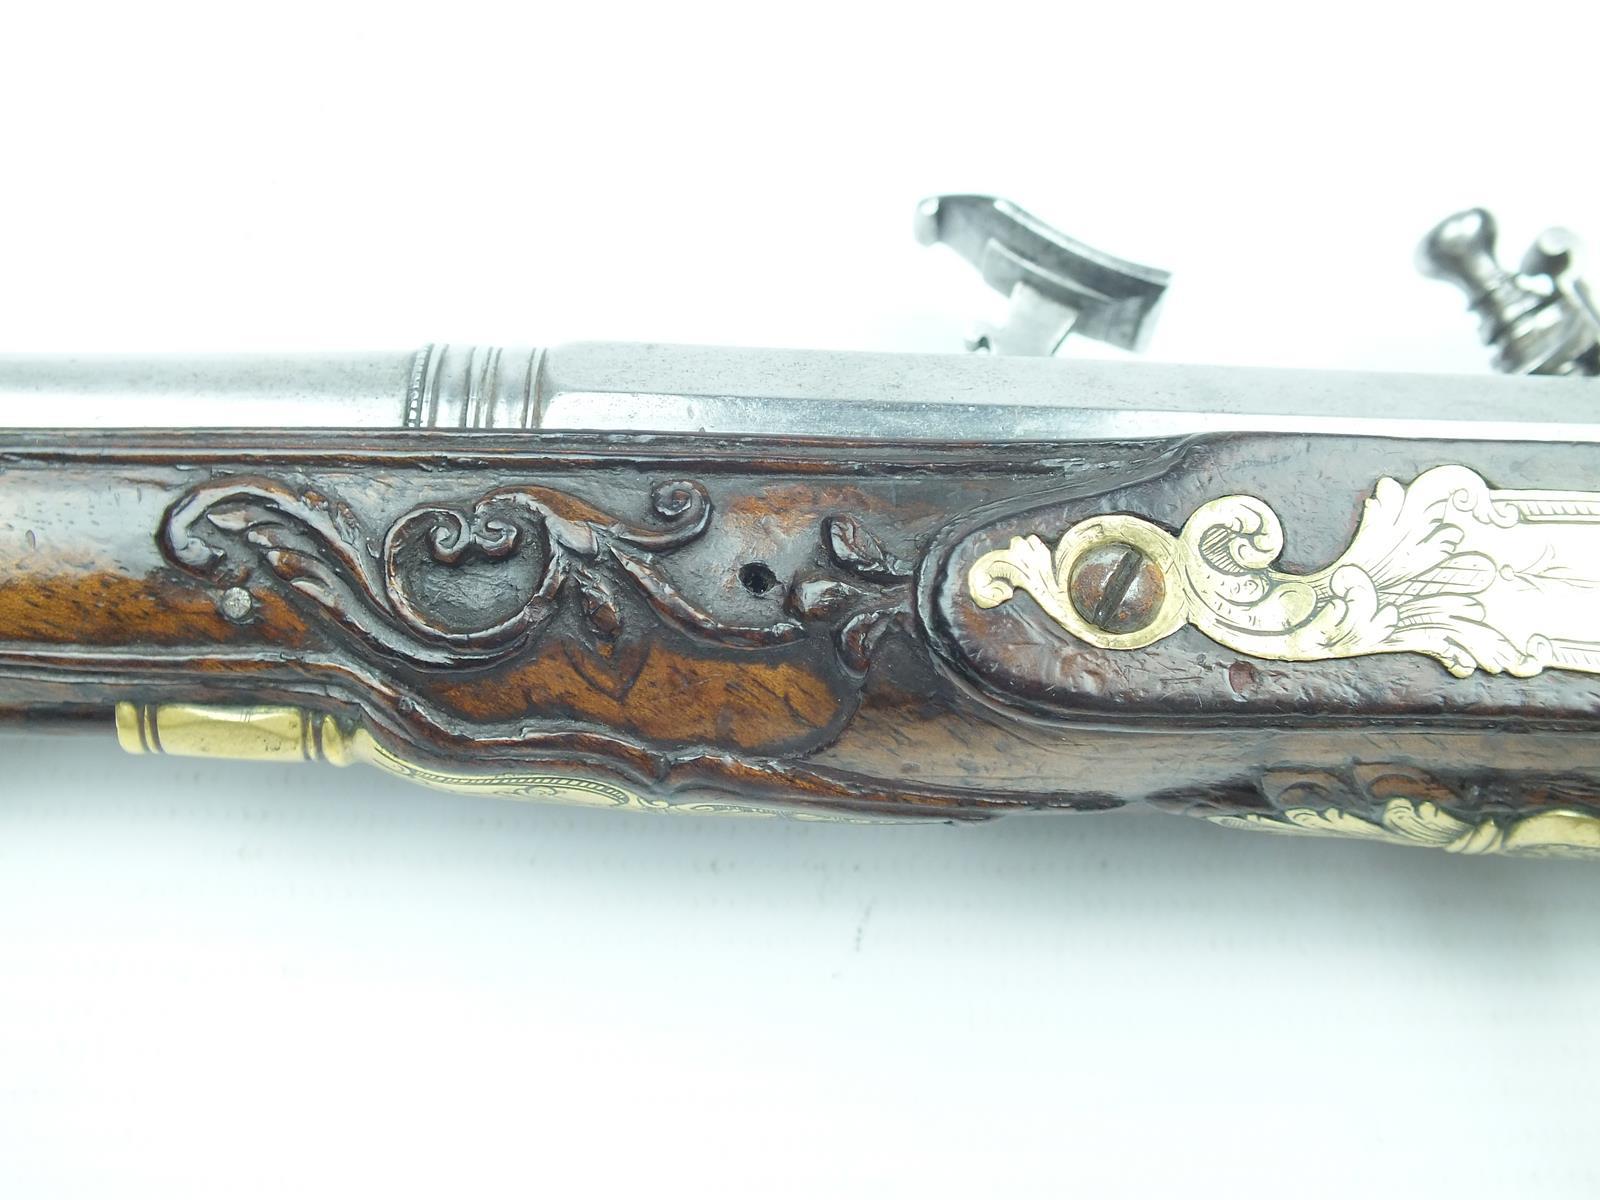 A 40-bore Tusco-Emilian snaphaunce travelling pistol by Brento, 6.75inch two-stage swamped barrel, - Image 5 of 10